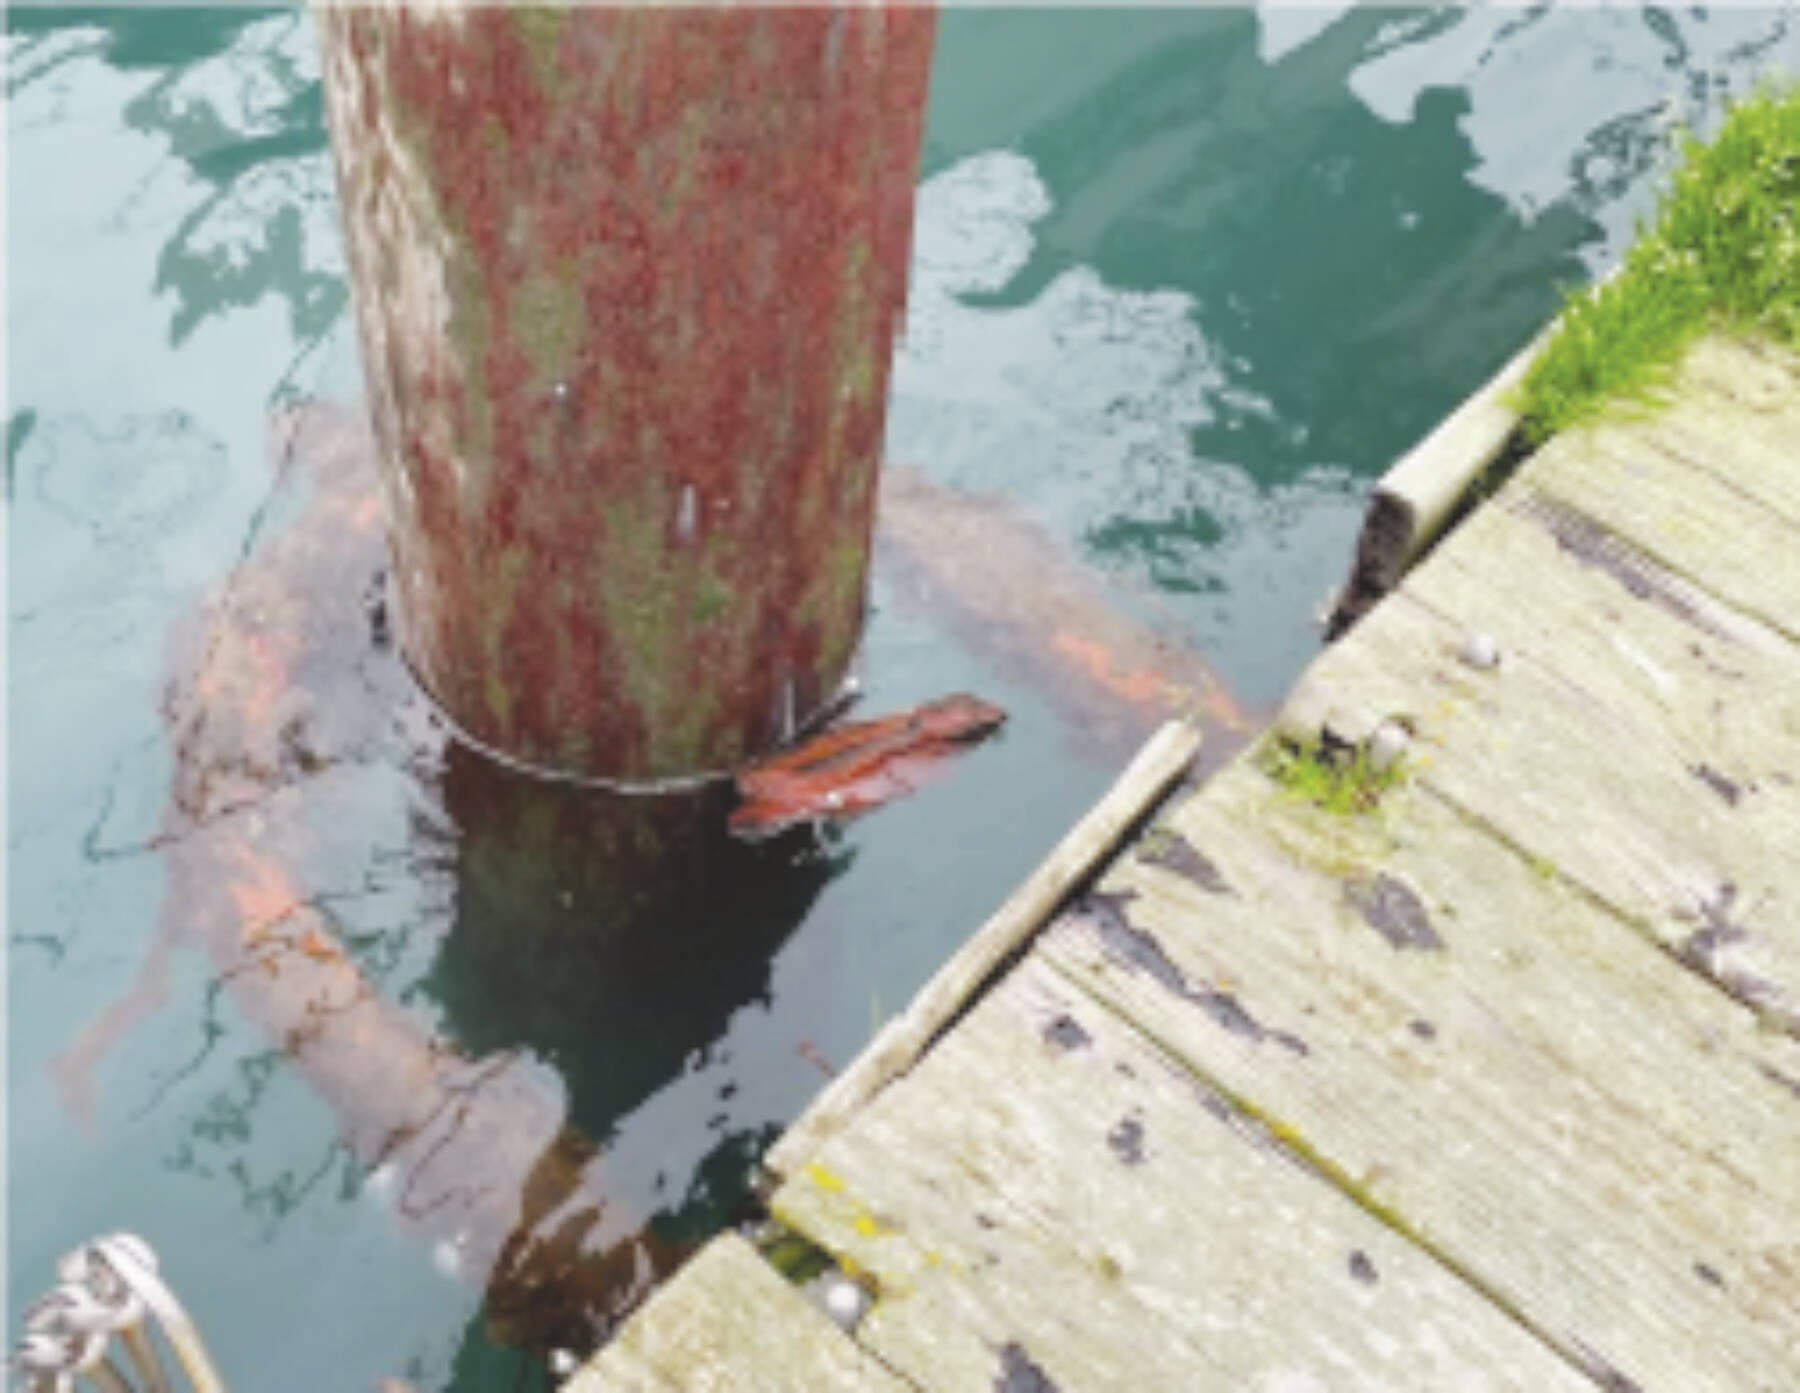 Example of Homer Harbor float damage: low freeboard resulting in submerged pile collar, corroding hardware connections, with connections protruding through decking.  Photo provided by the City of Homer.